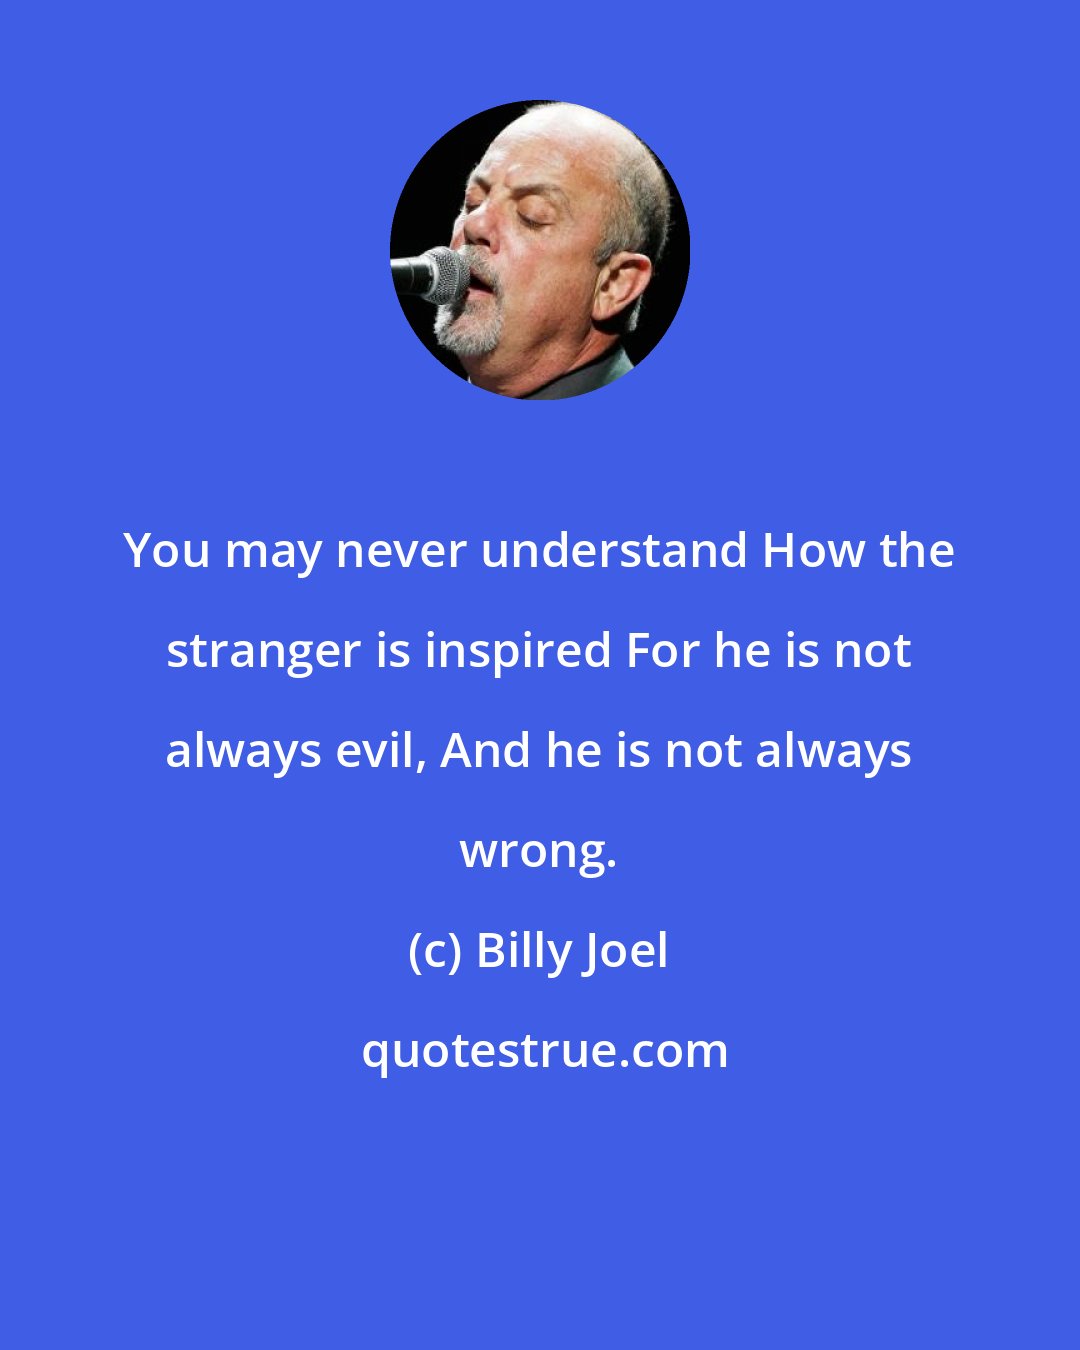 Billy Joel: You may never understand How the stranger is inspired For he is not always evil, And he is not always wrong.